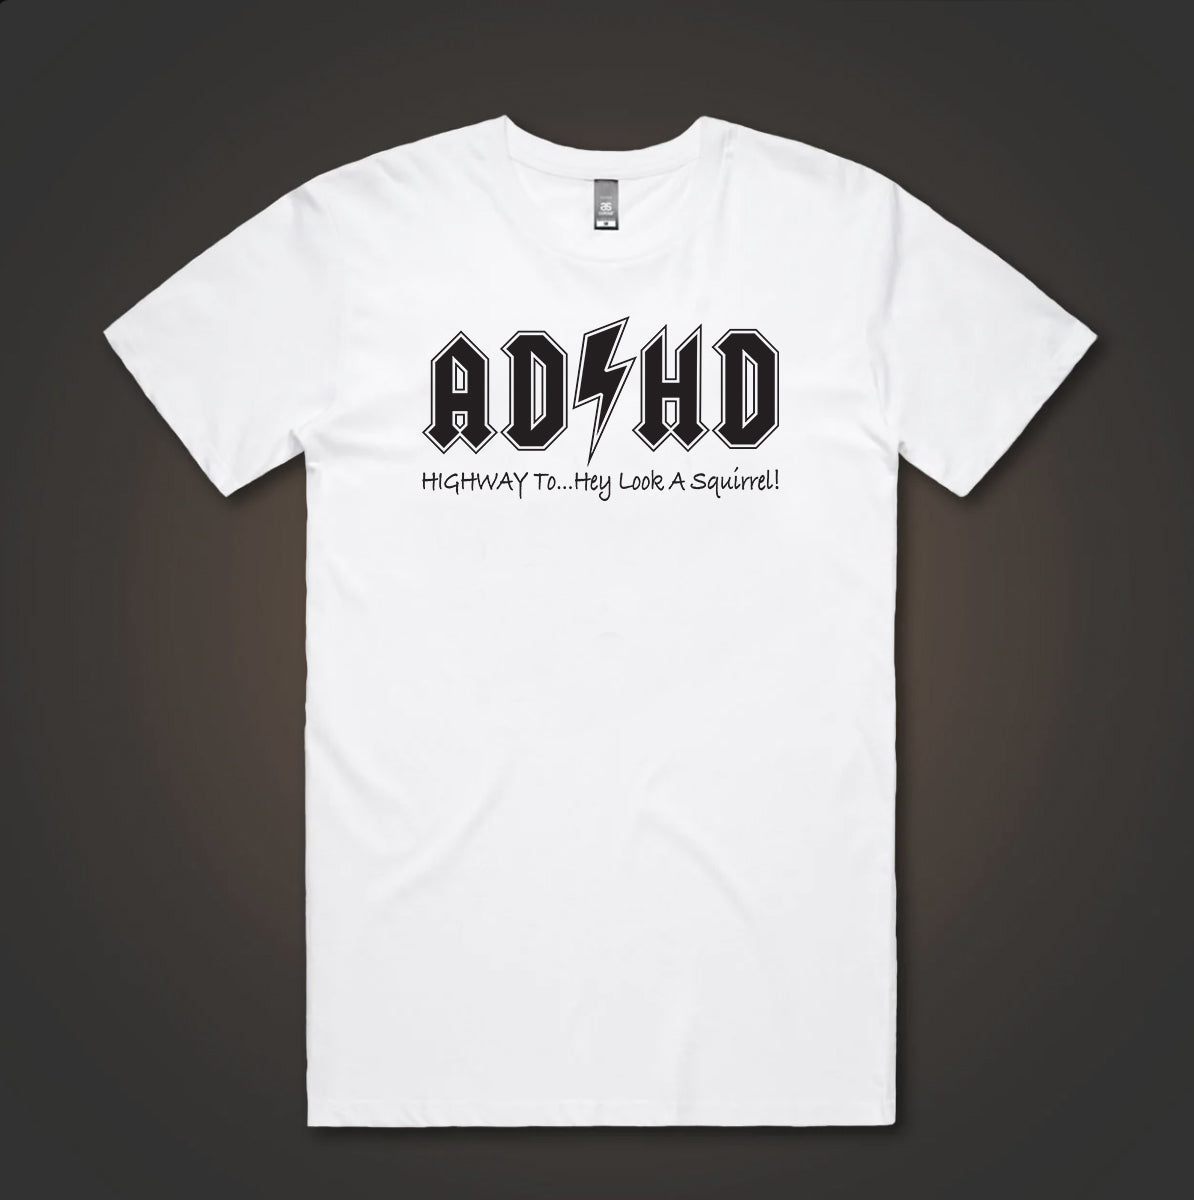 ADHD - Highway to.. Hey Look a Squirrel Guitarist T-Shirt